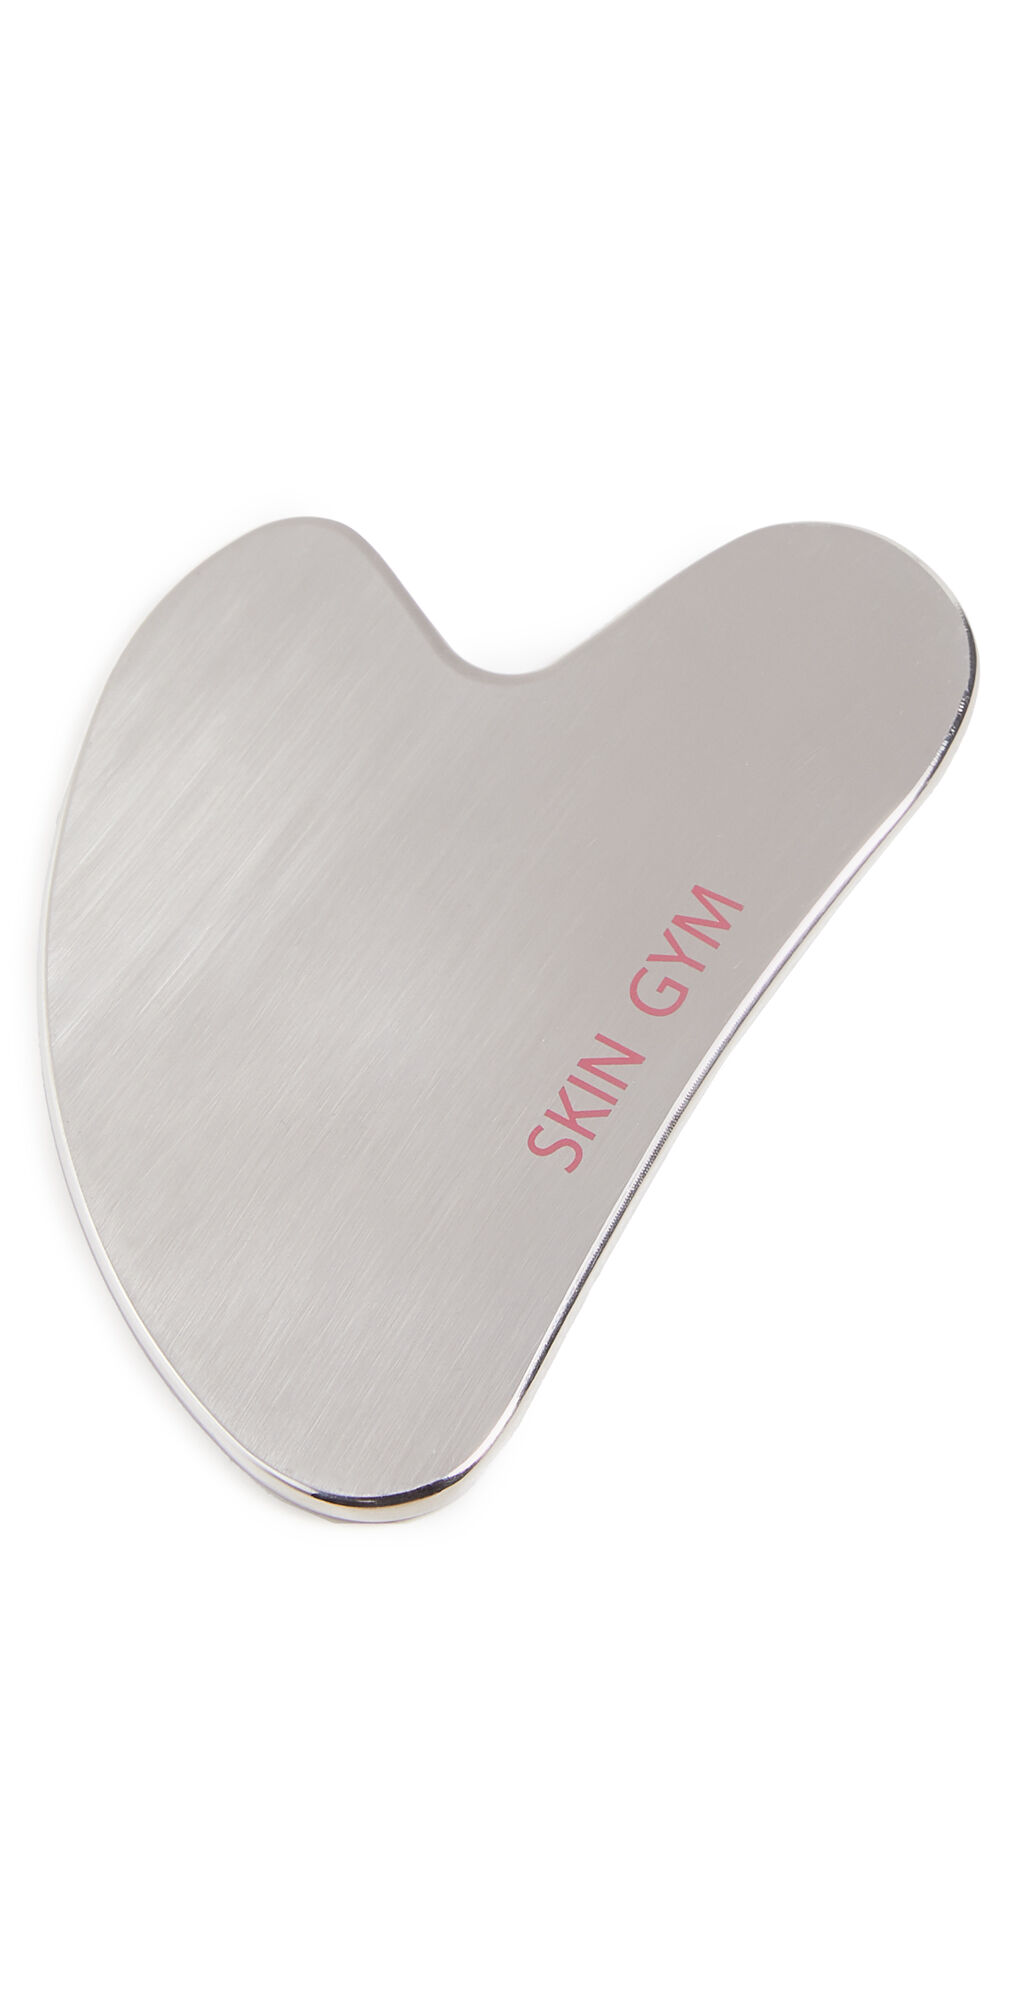 Skin Gym Hearty Gua Sha Stainless Steel One Size    size: